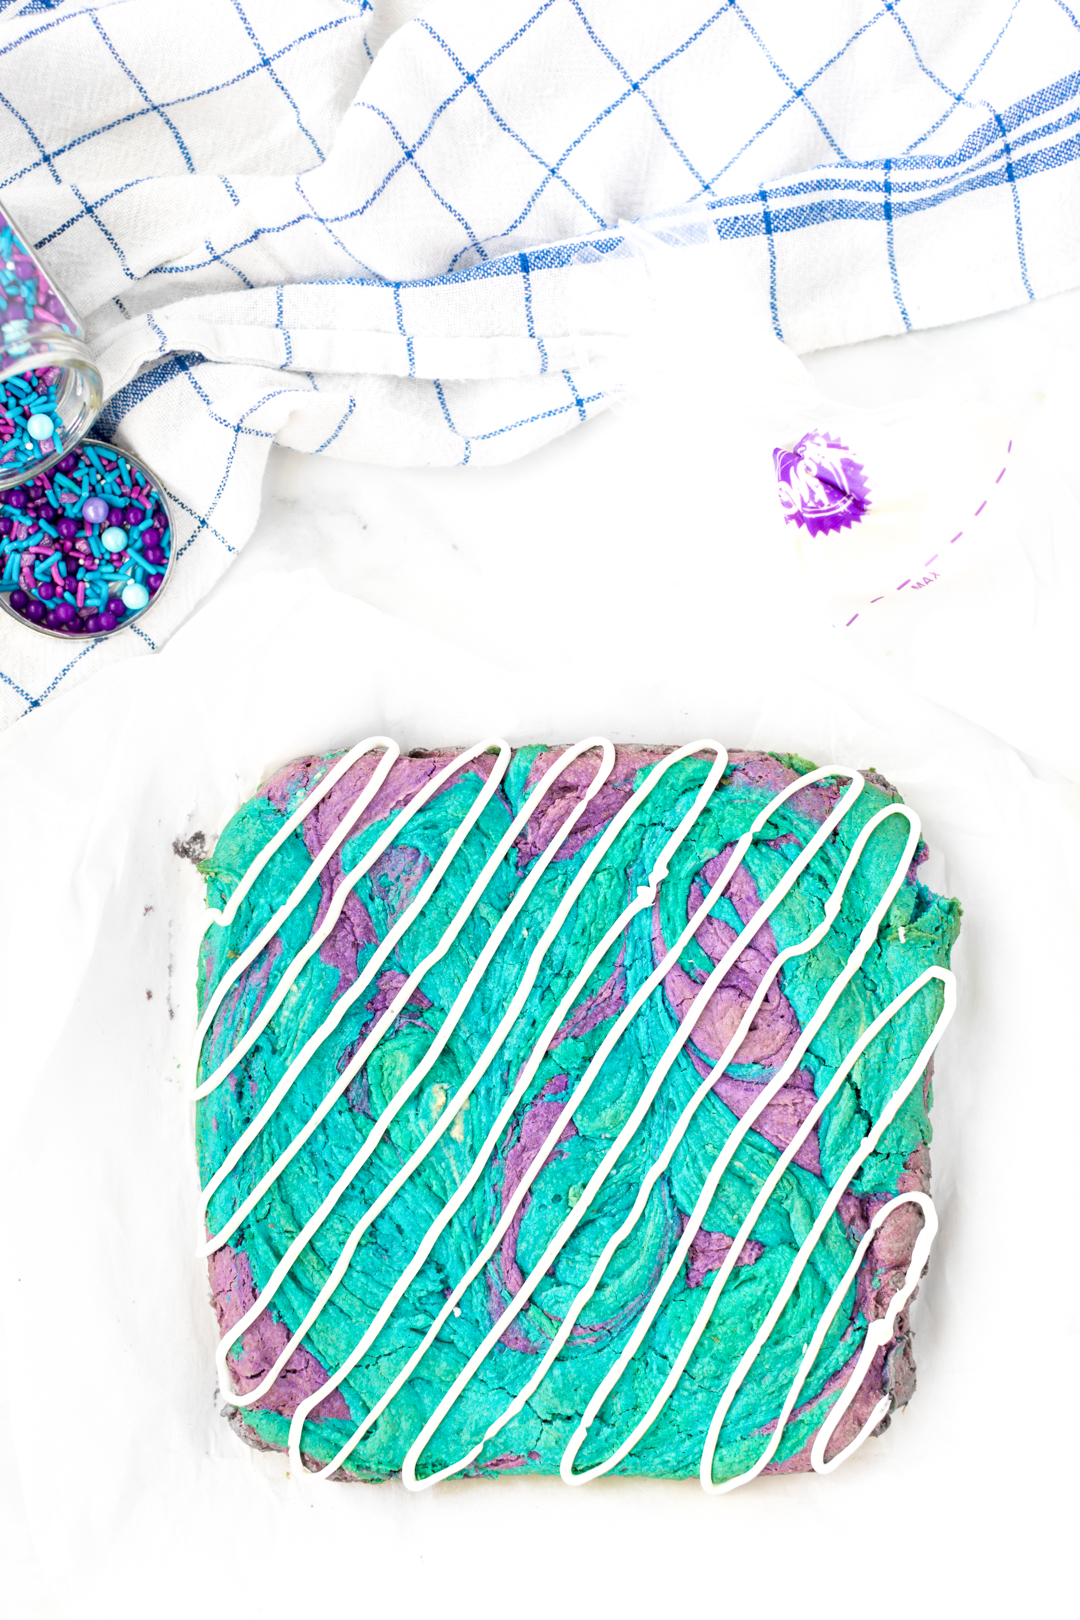 Icing drizzled on top of colorful purple and teal bars